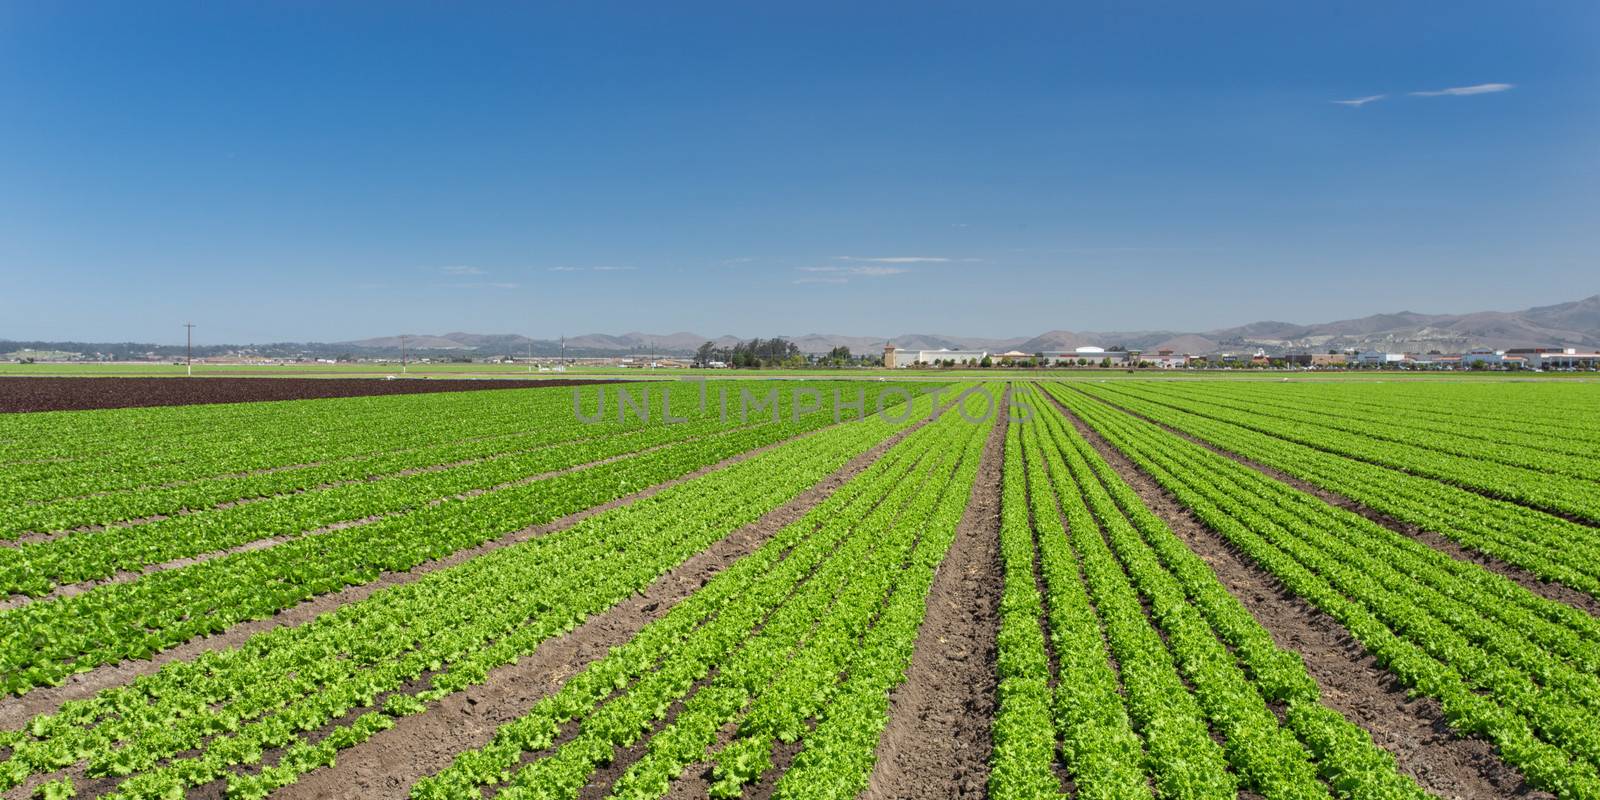 Panoramic View of Newly Planted Lettuce Field in Salinas, California